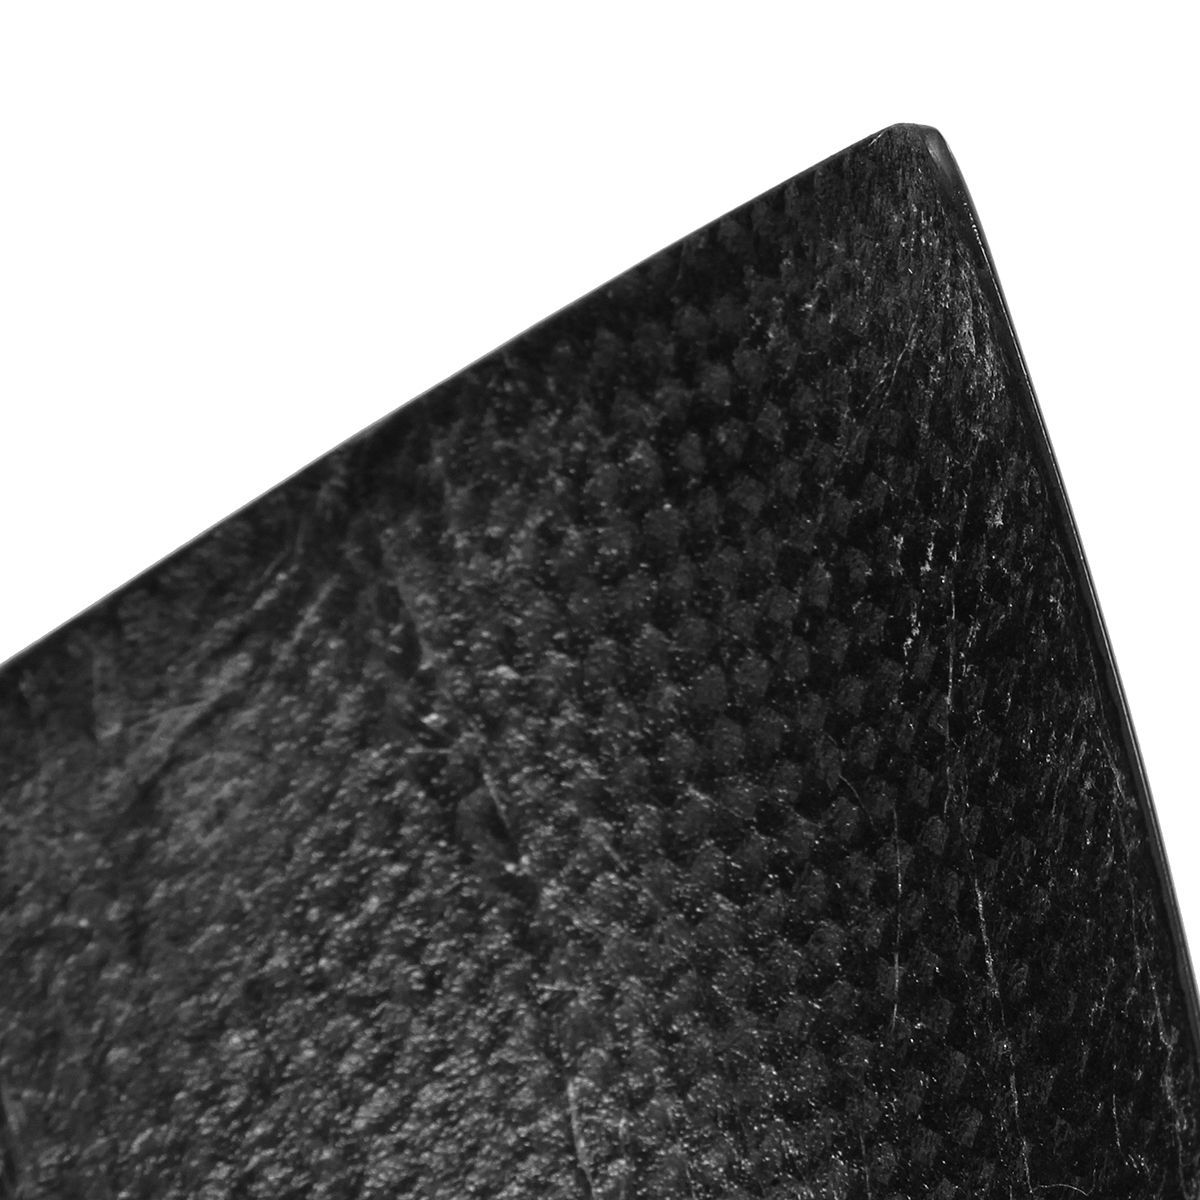 Car-Carbon-Fiber-Side-Mirror-Cover-Caps-Add-on-Pair-for-LEXUS-GS350-GS450H-GSF-2013-17-LHD-Model-1304611